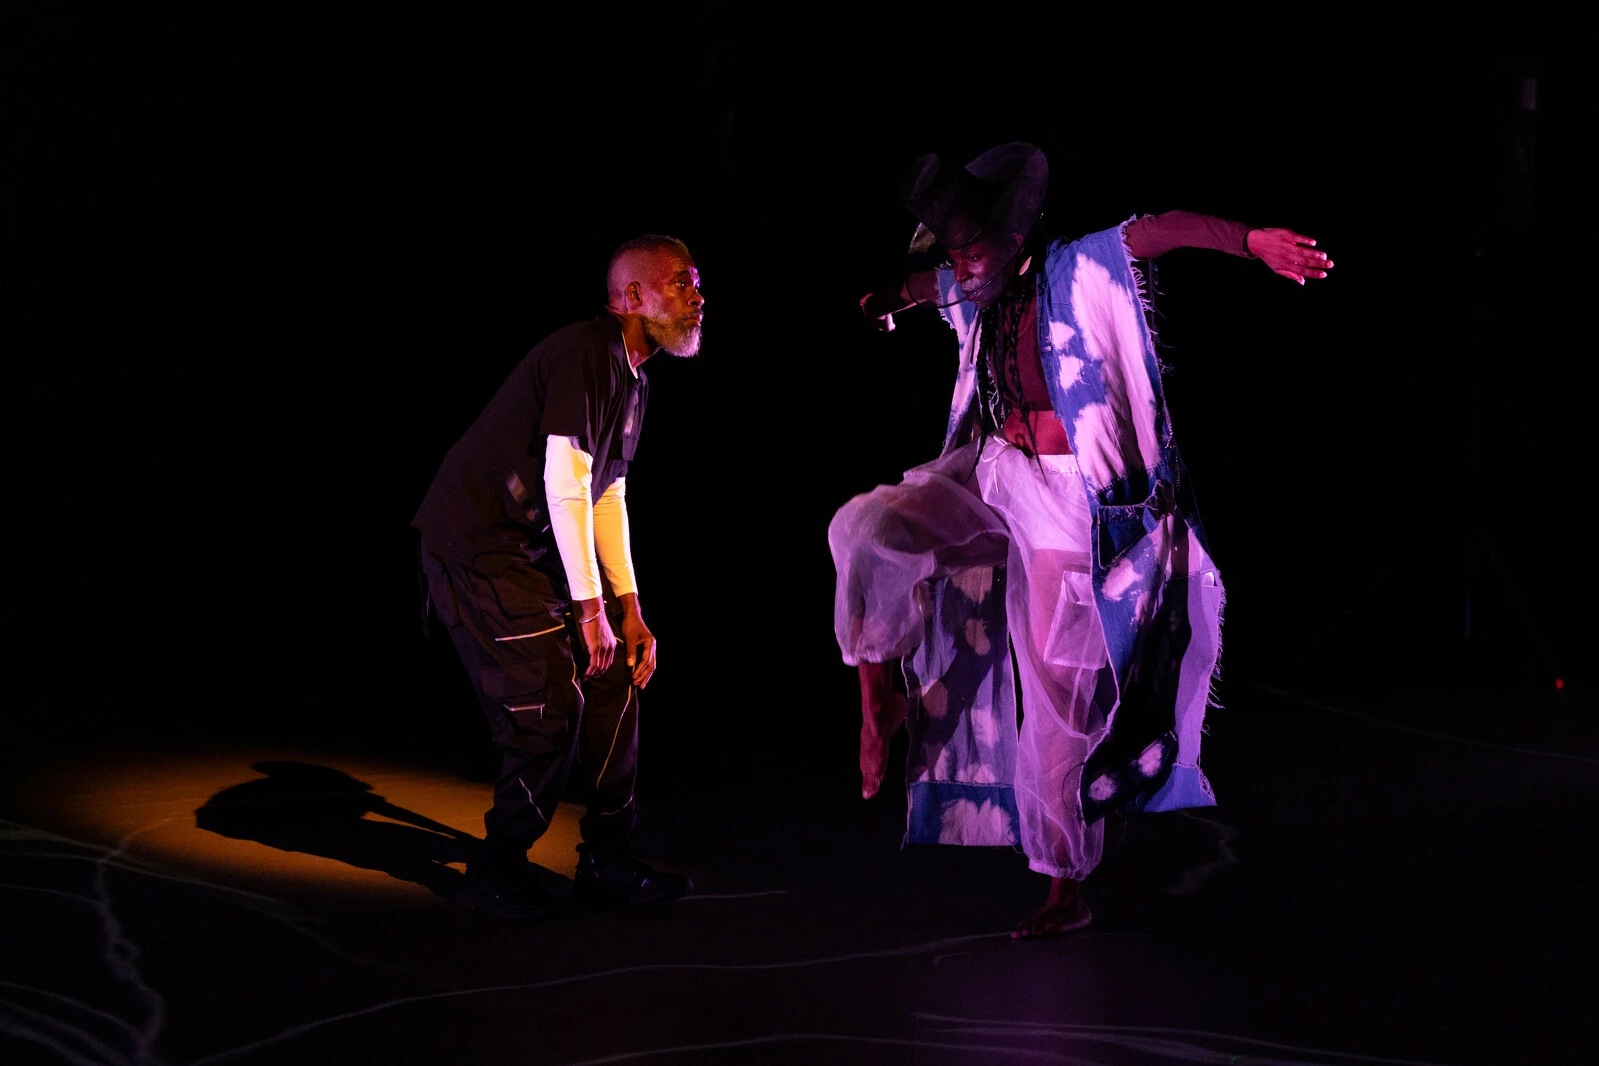 On a darkened stage lit only by purple spotlights a woman is captured mid-jump as a man crouches next to her.